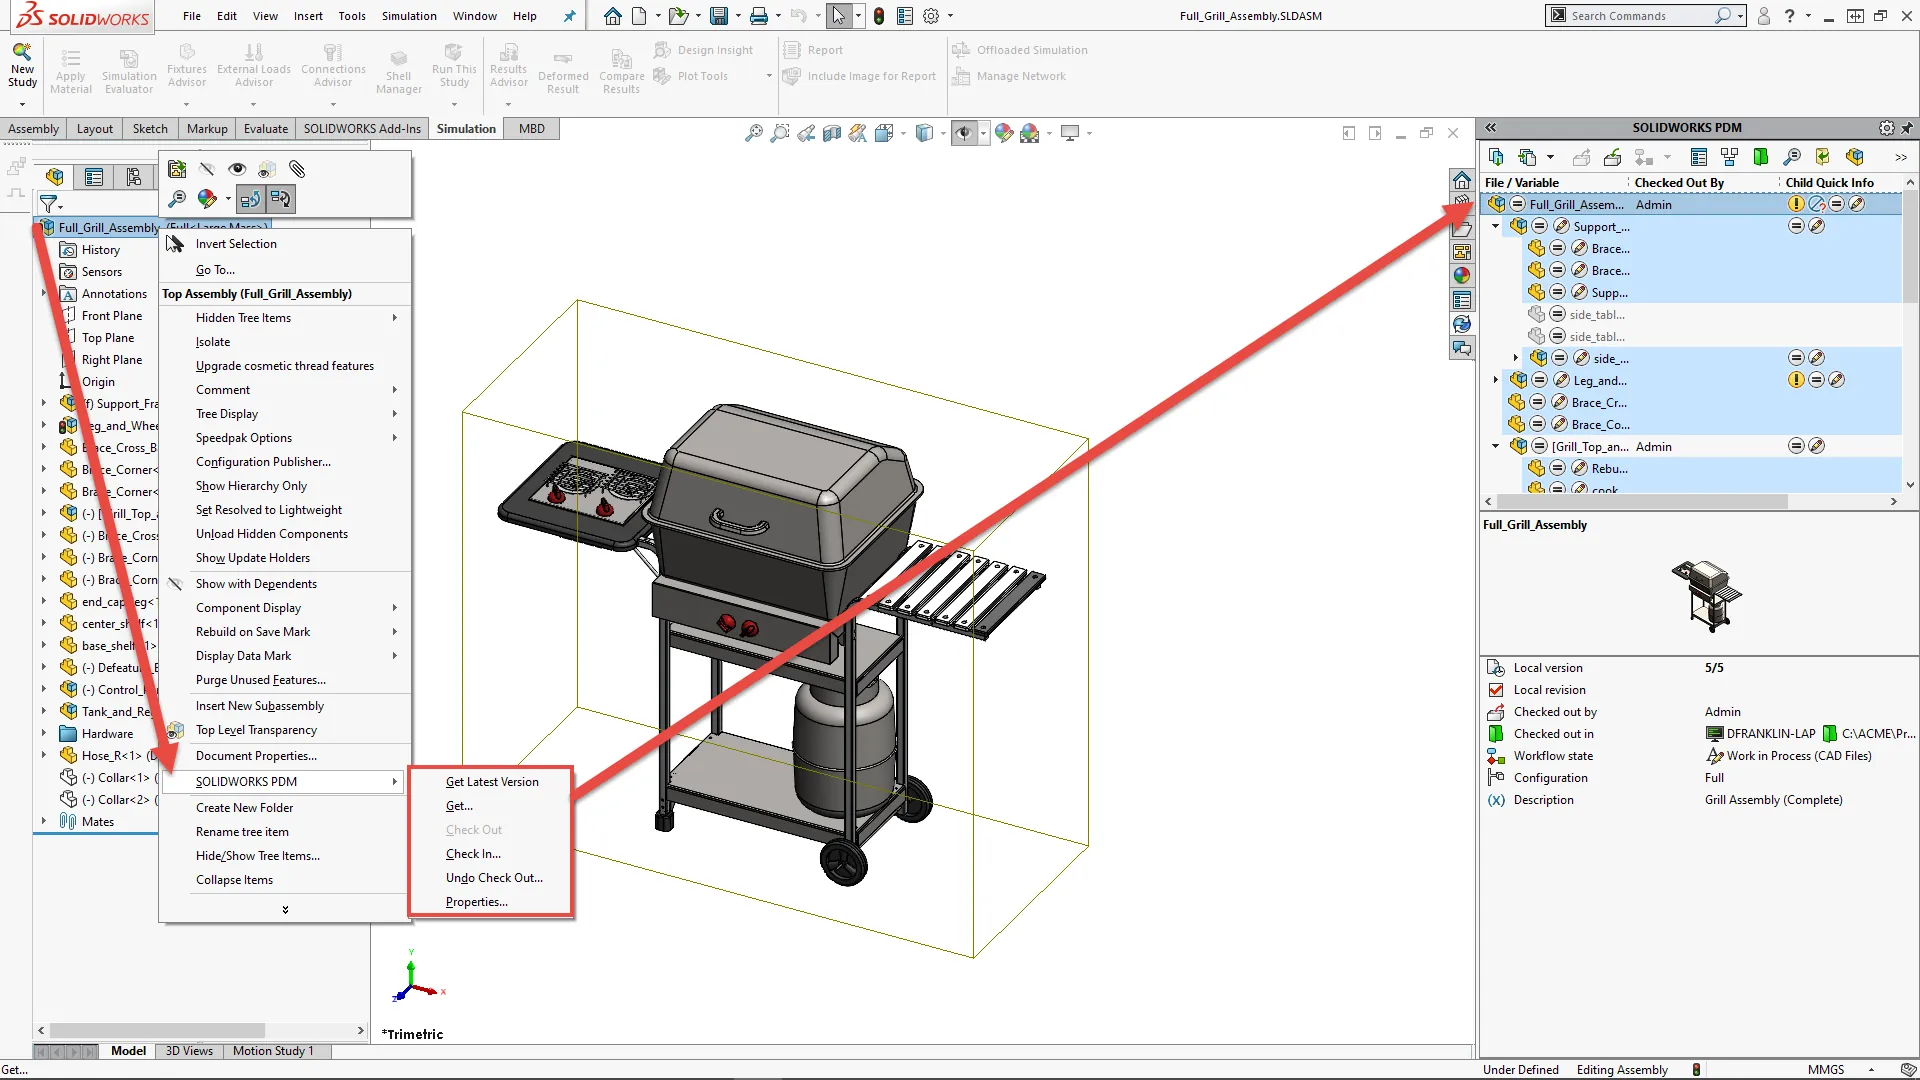 SOLIDWORKS 2020 FeatureManager Tree 